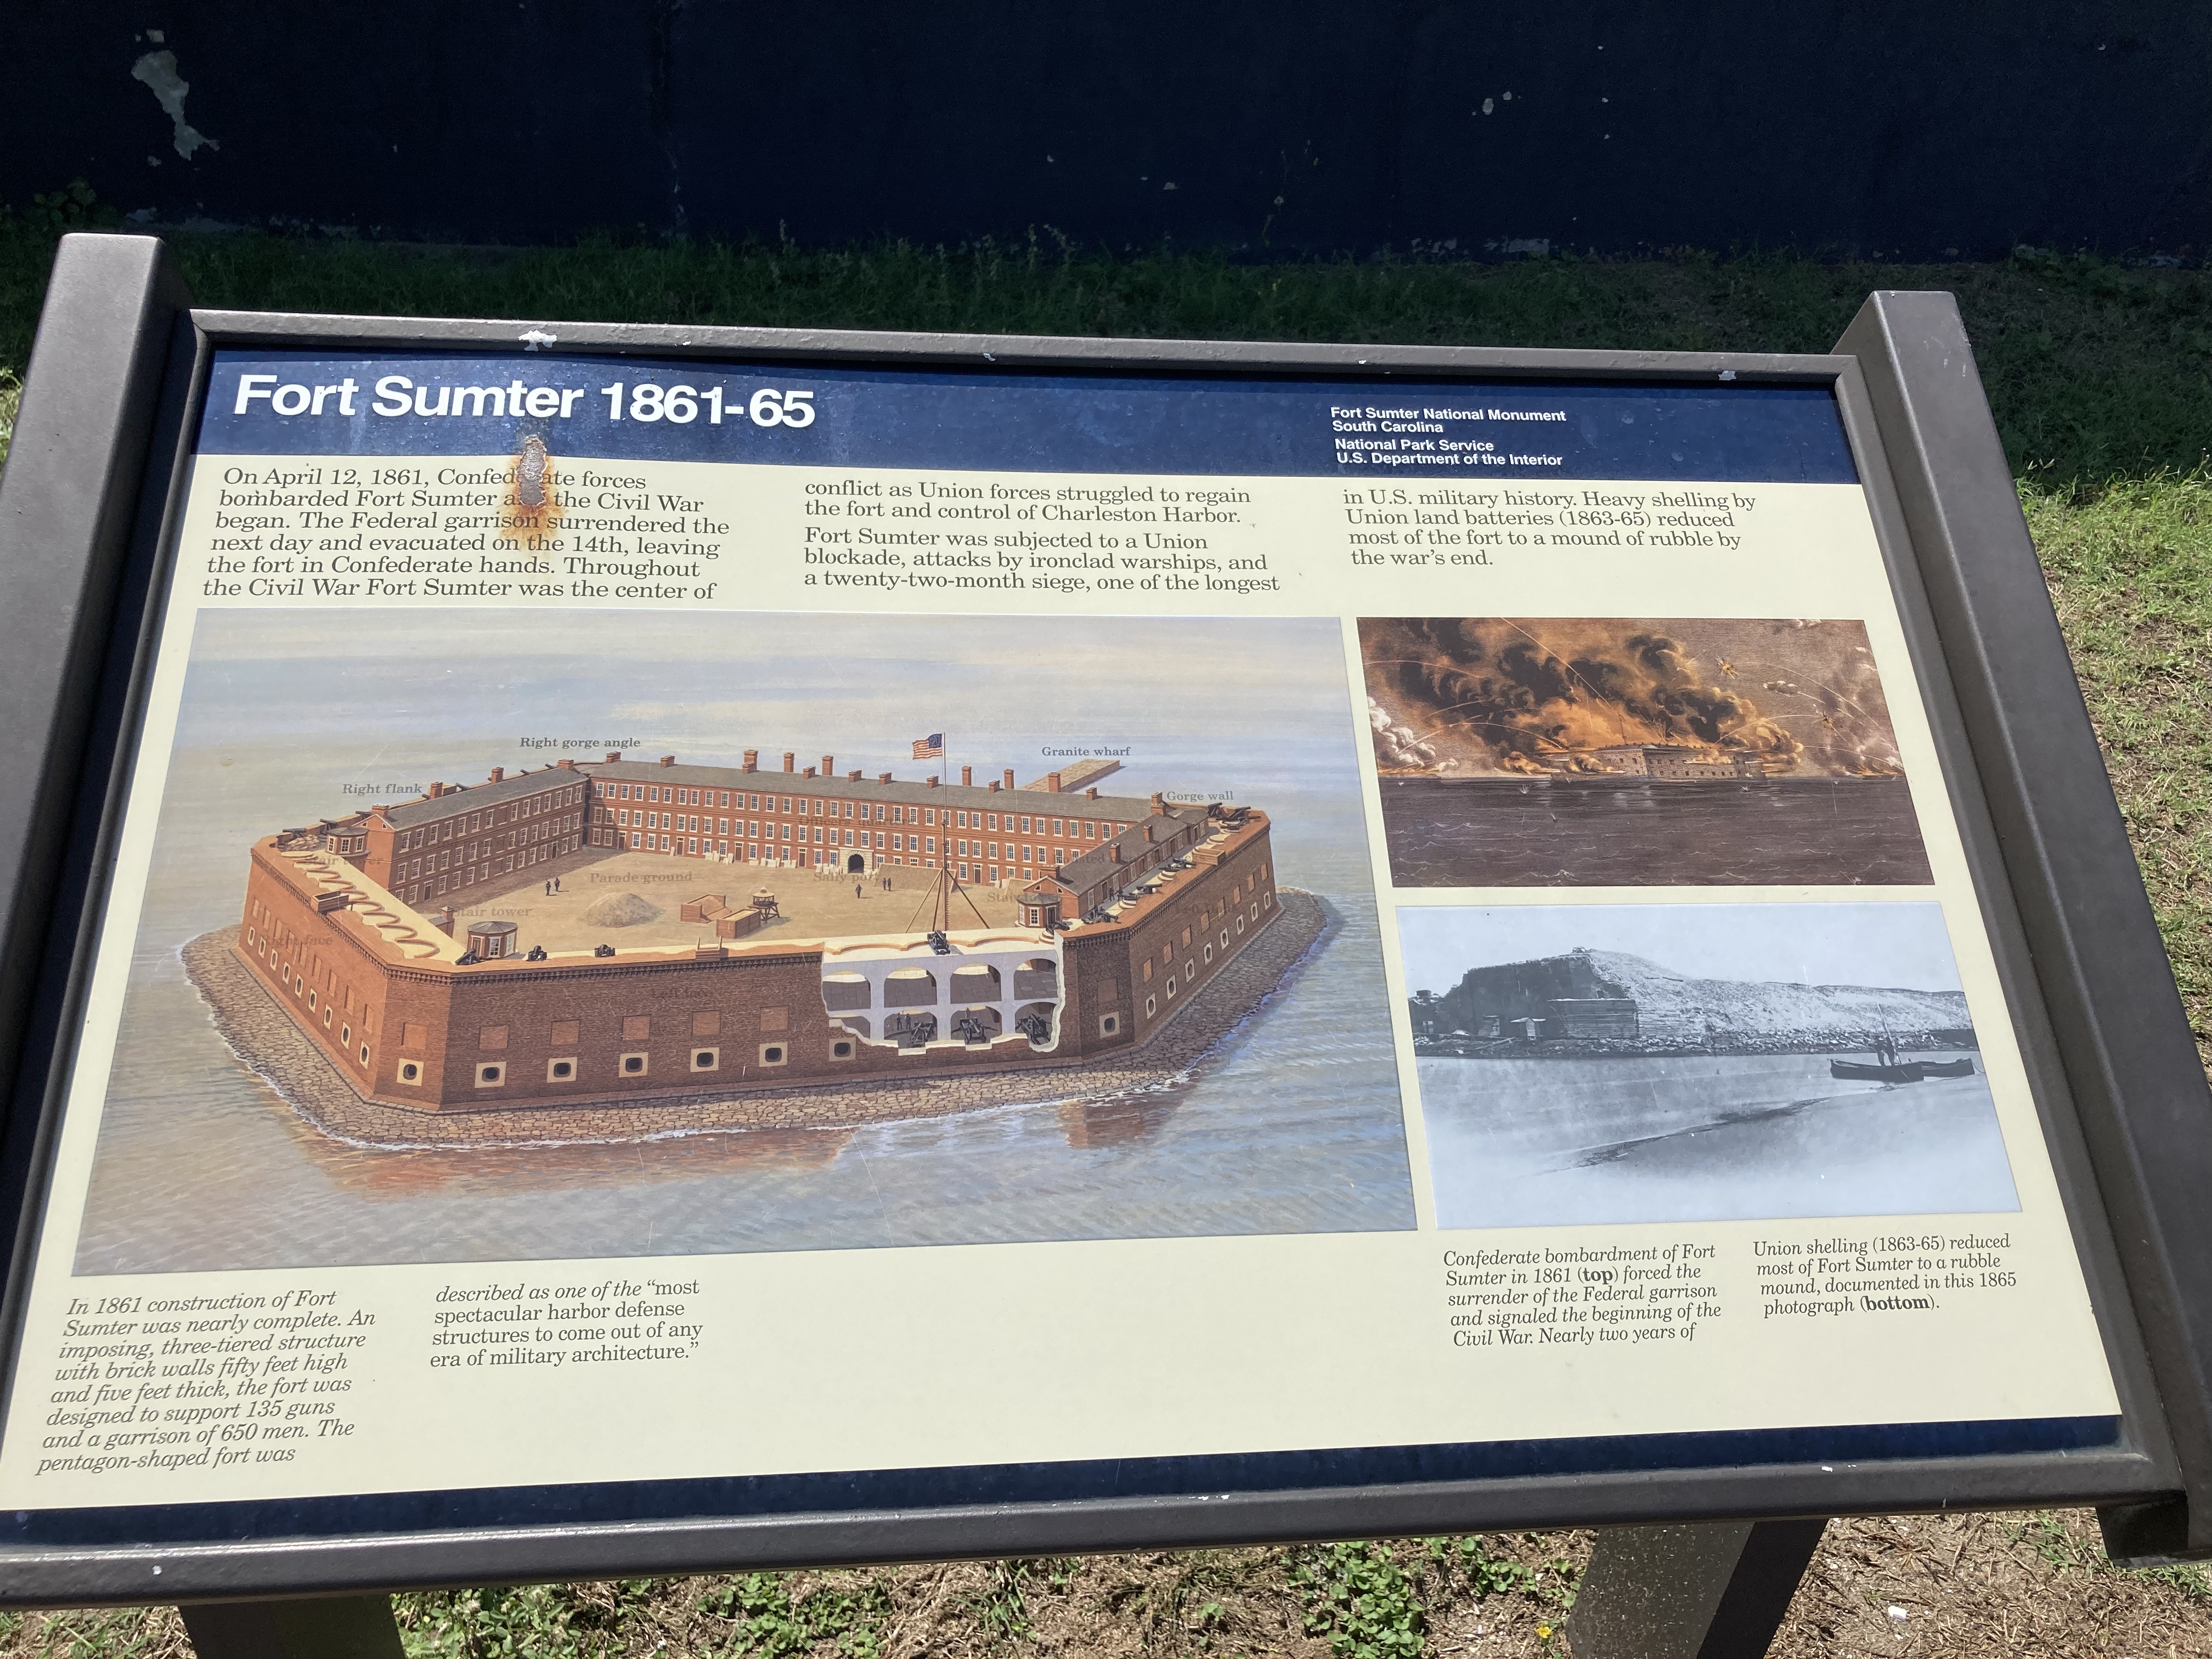 Fort Sumter History